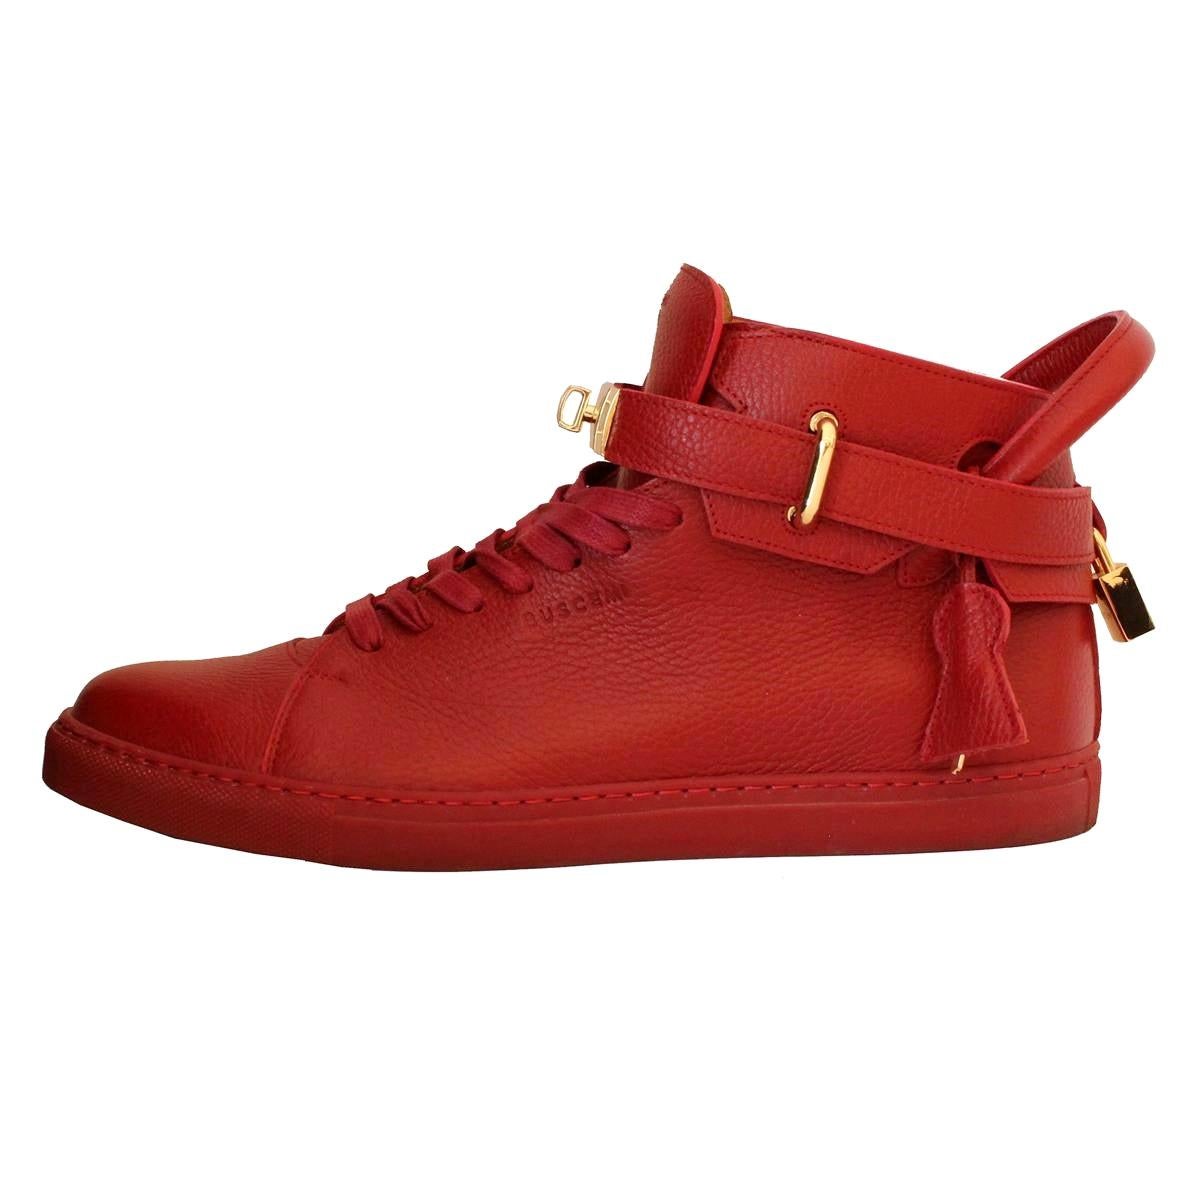 Buscemi Italy Mens Red Leather Sneakers 44